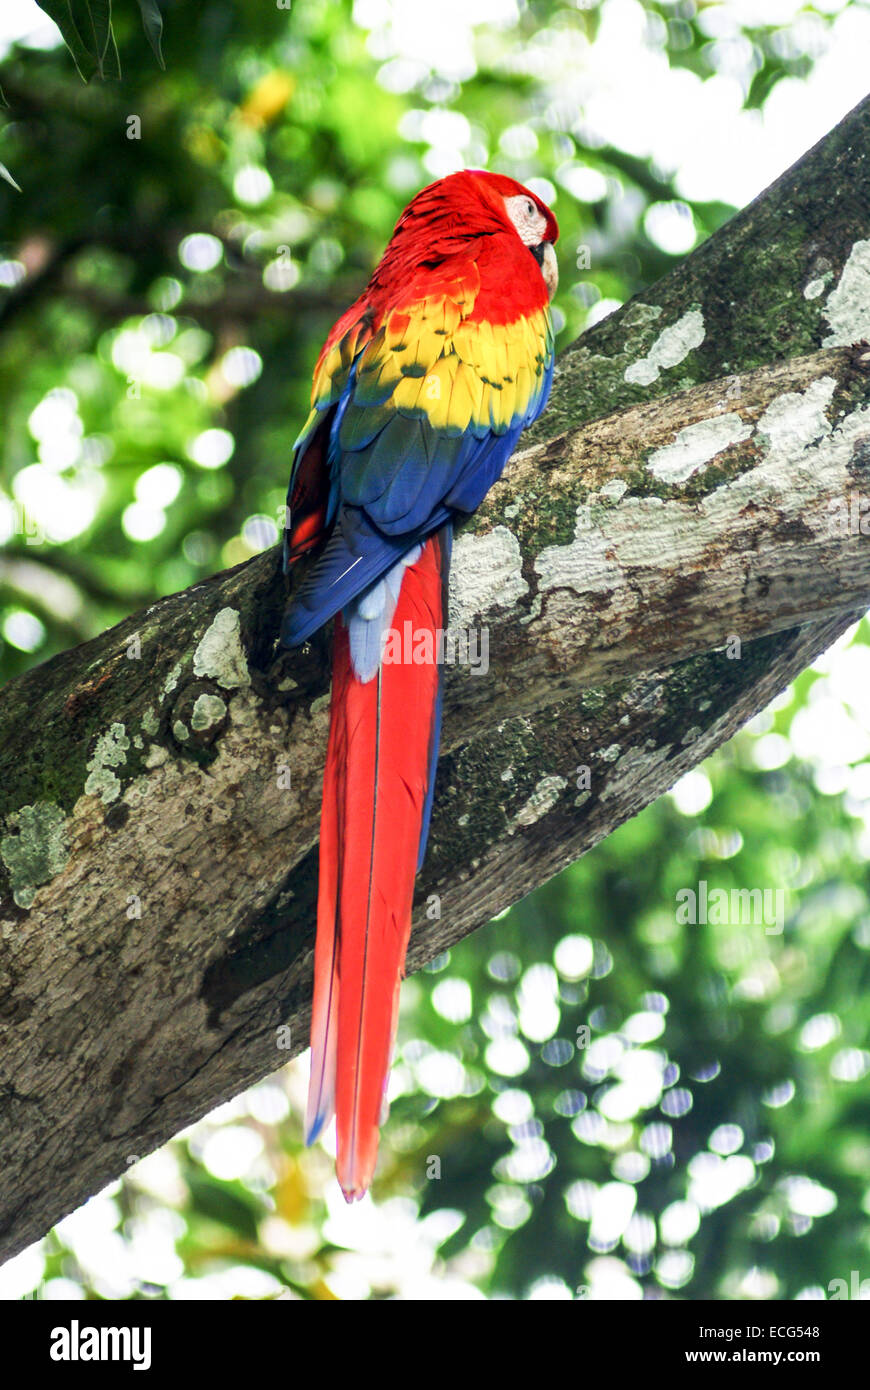 Colourful scarlet macaw (Ara macao) Parrot. Photographed in the Rain forest of Costa Rica Stock Photo